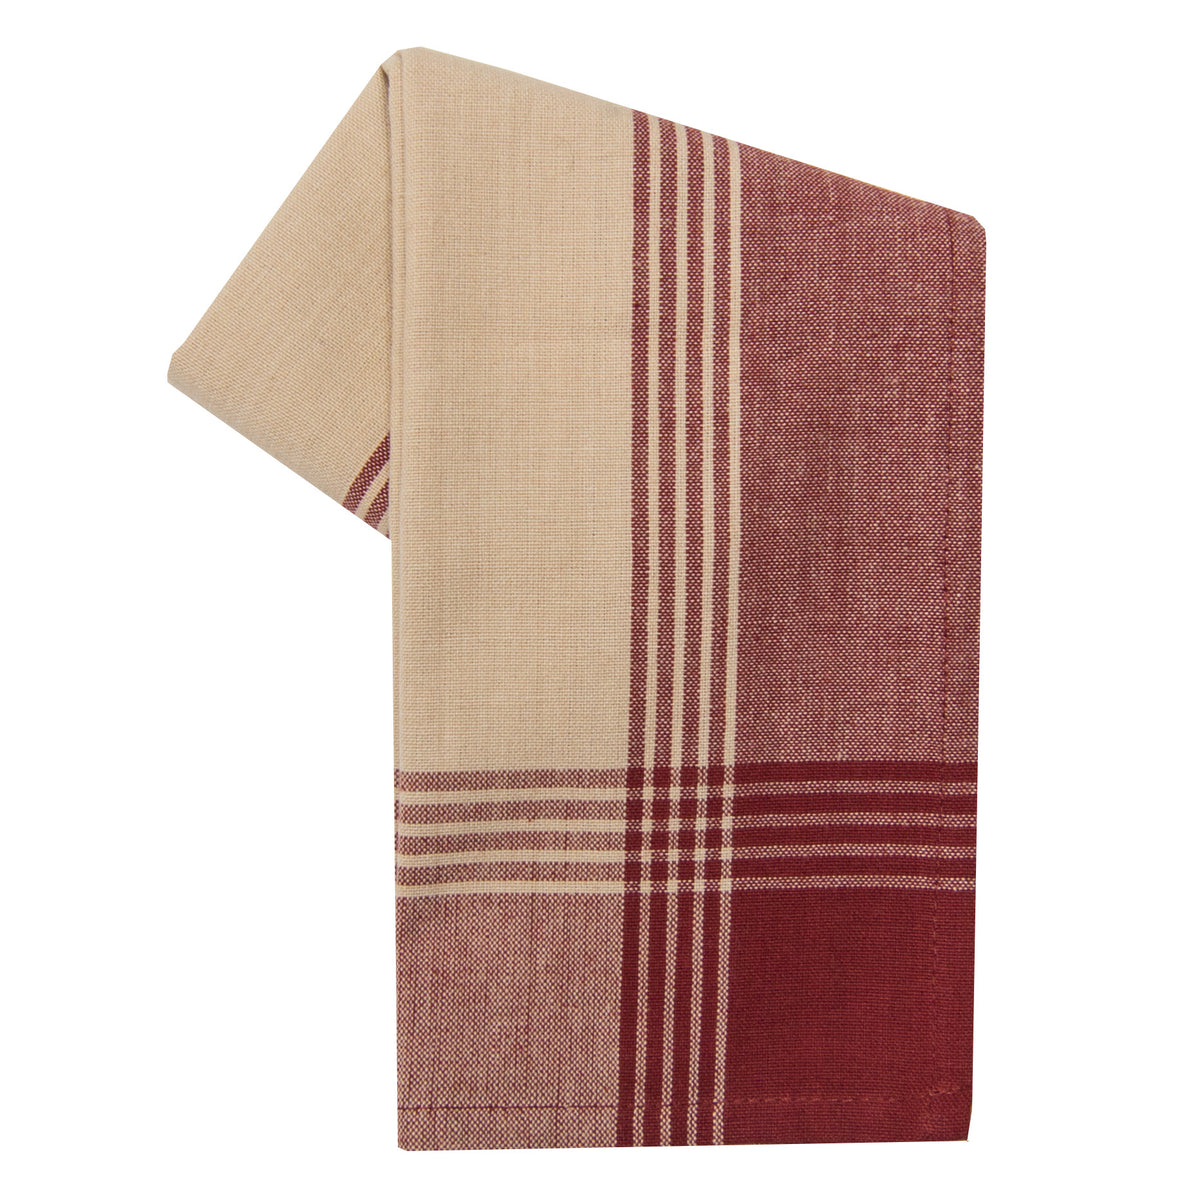 2 NWT Dunroven House Cotton Kitchen Towels• Dark Green/Burgundy Red Stripes